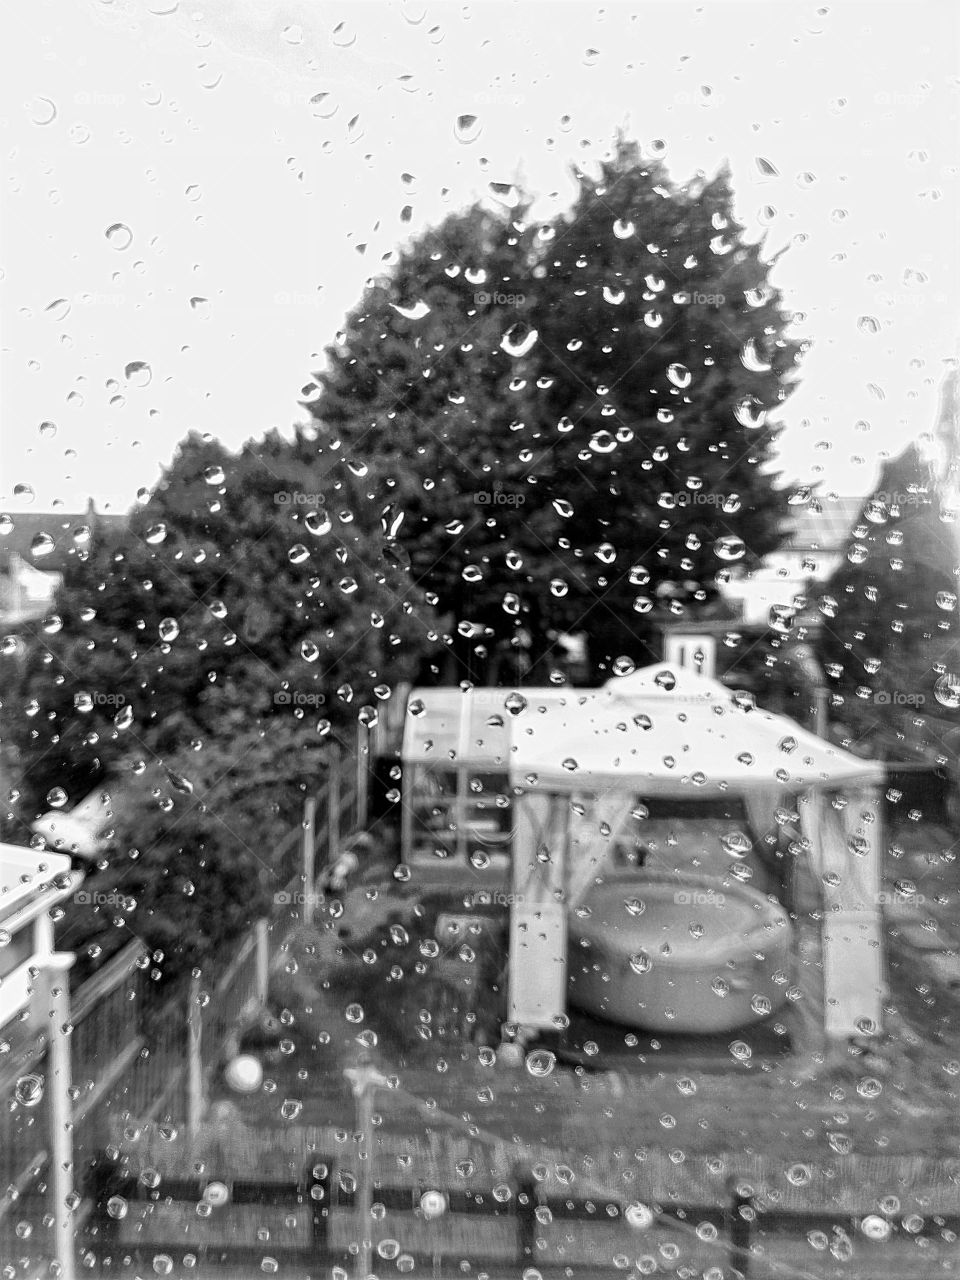 water droplets on my window taken in black and white